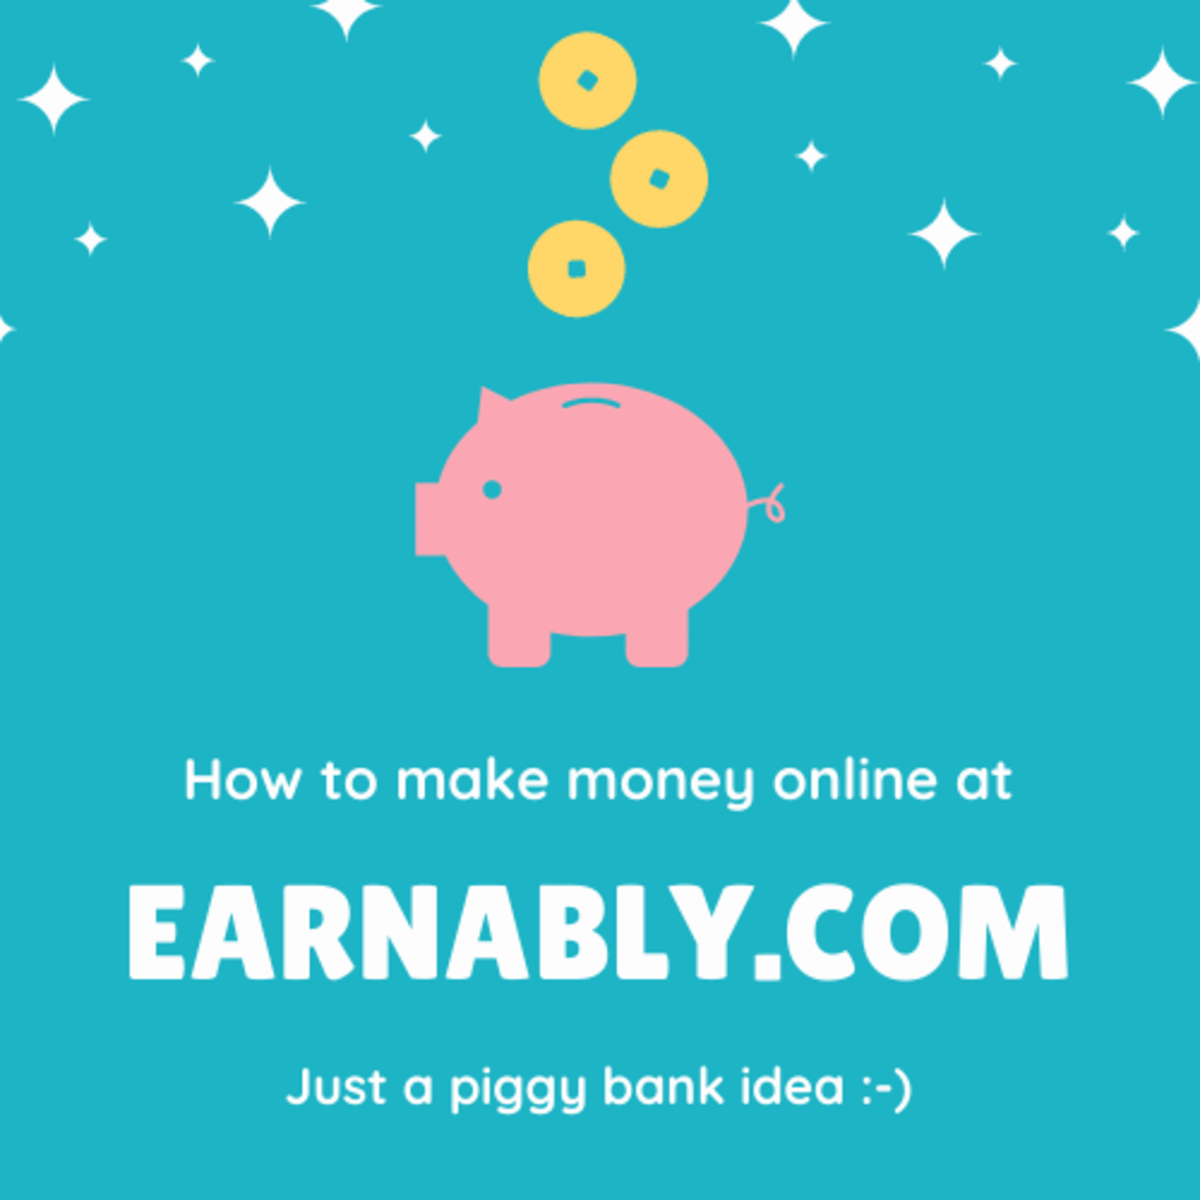 How to Make Money Watching Videos With Earnably